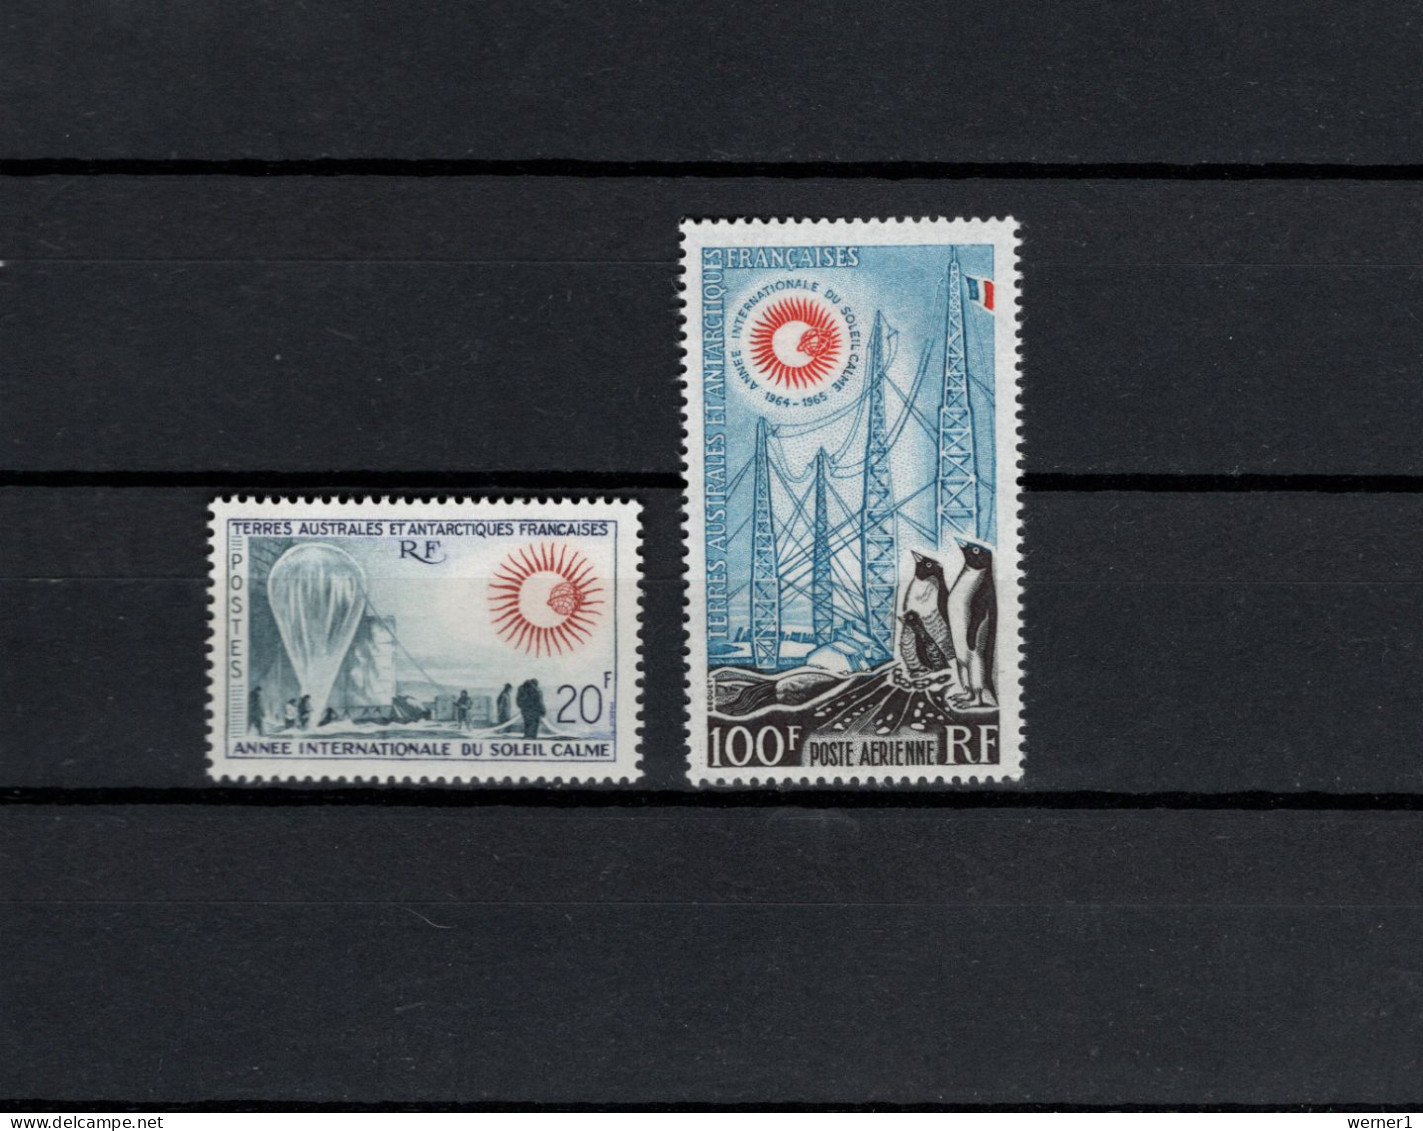 FSAT French Antarctic Territory 1963 Space, International Year Of The Quiet Sun Set Of 2 MNH -scarce- - Oceanië